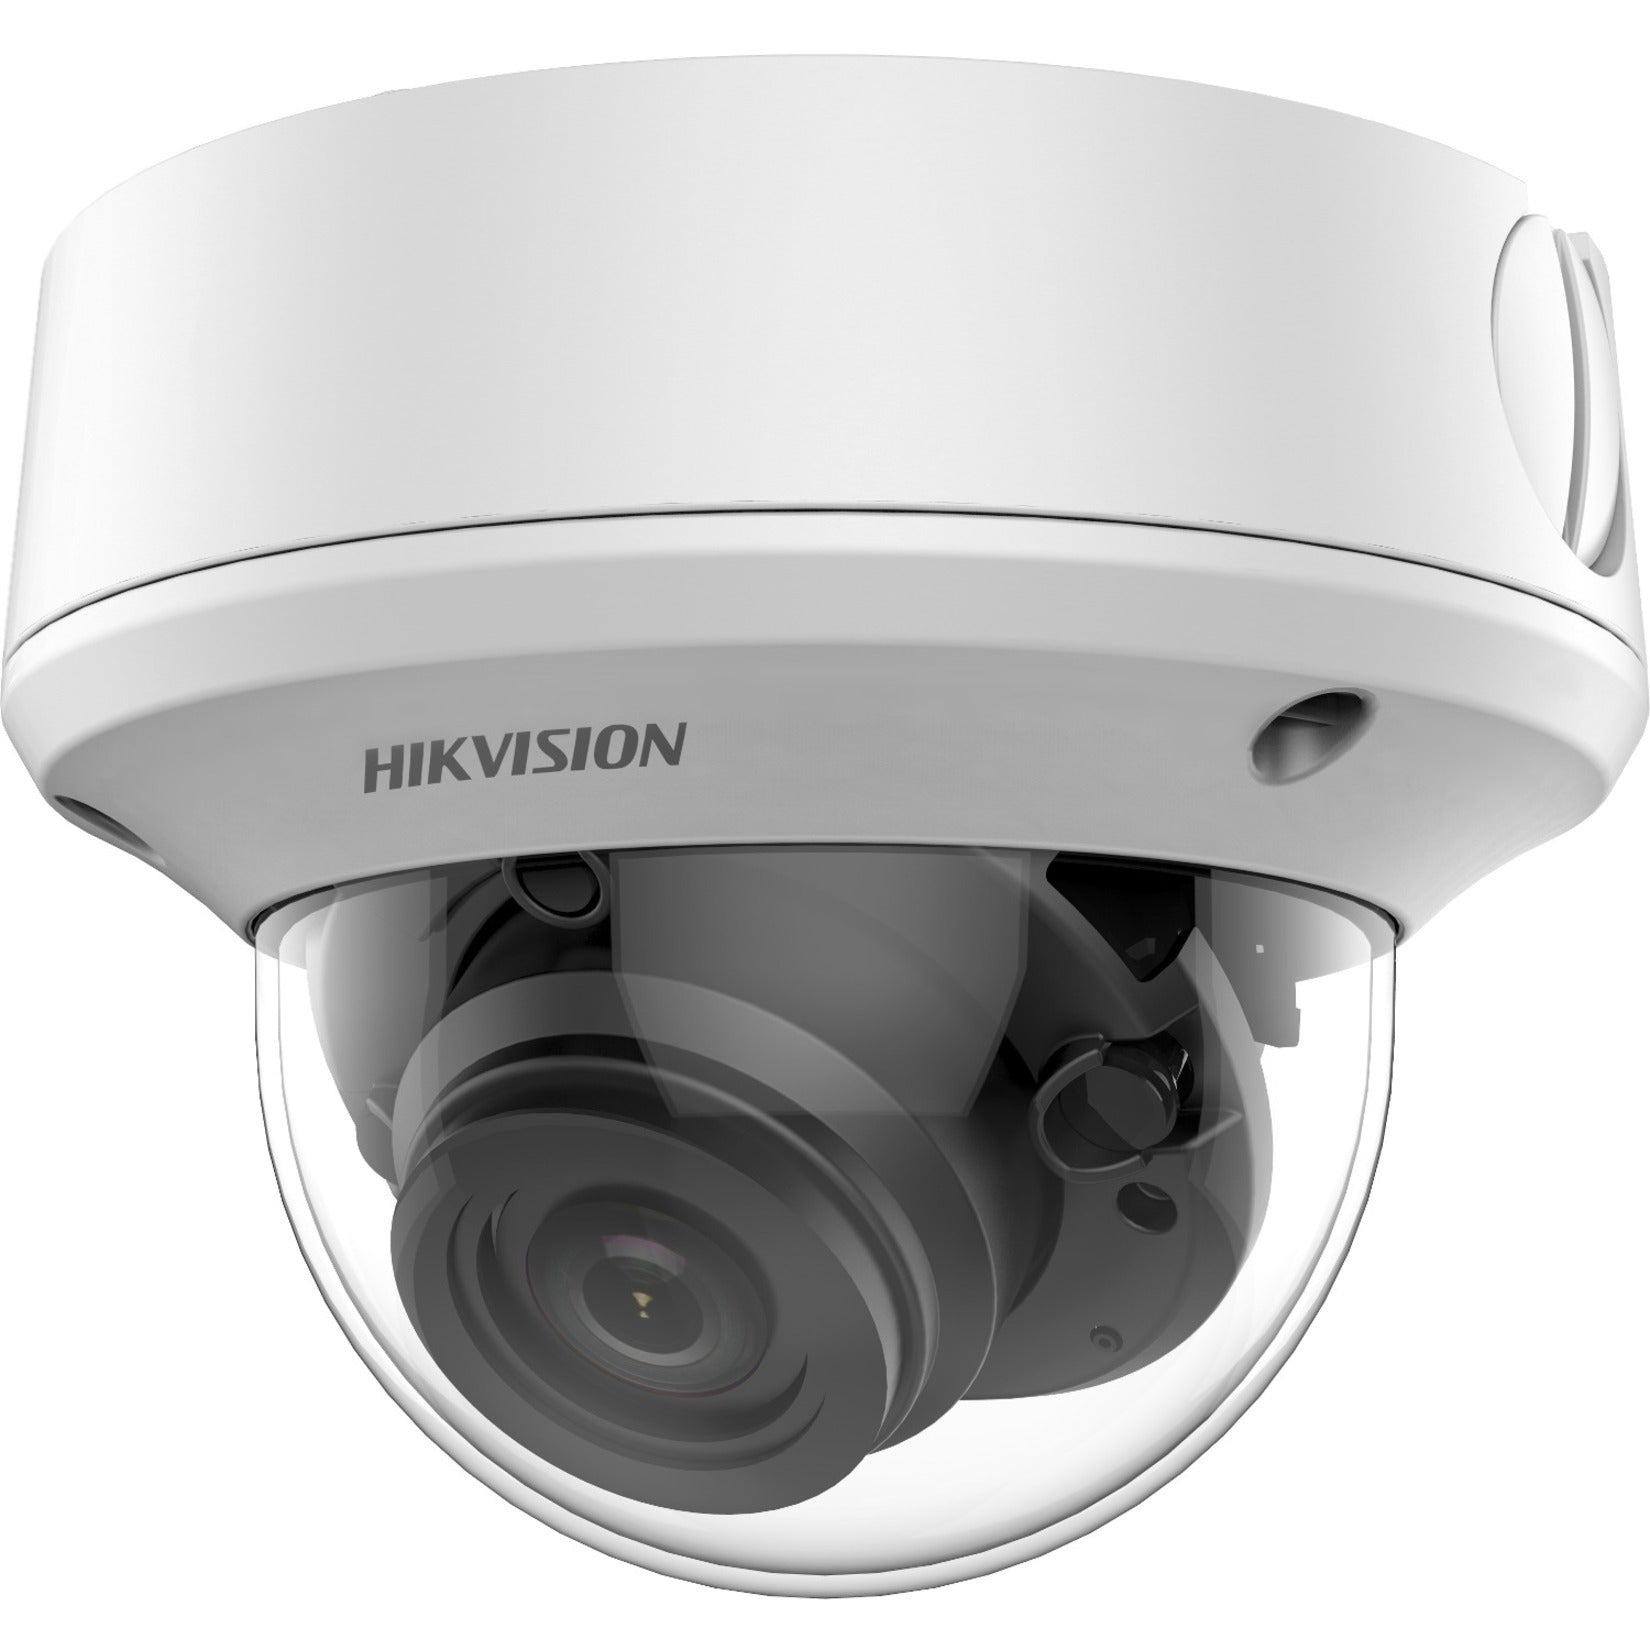 Hikvision DS-2CE5AD3T-AVPIT3ZF 2 MP Outdoor Ultra-Low Light Dome Camera, Varifocal Lens, 4.8x Optical Zoom, 70m IR Range, WDR, IP67